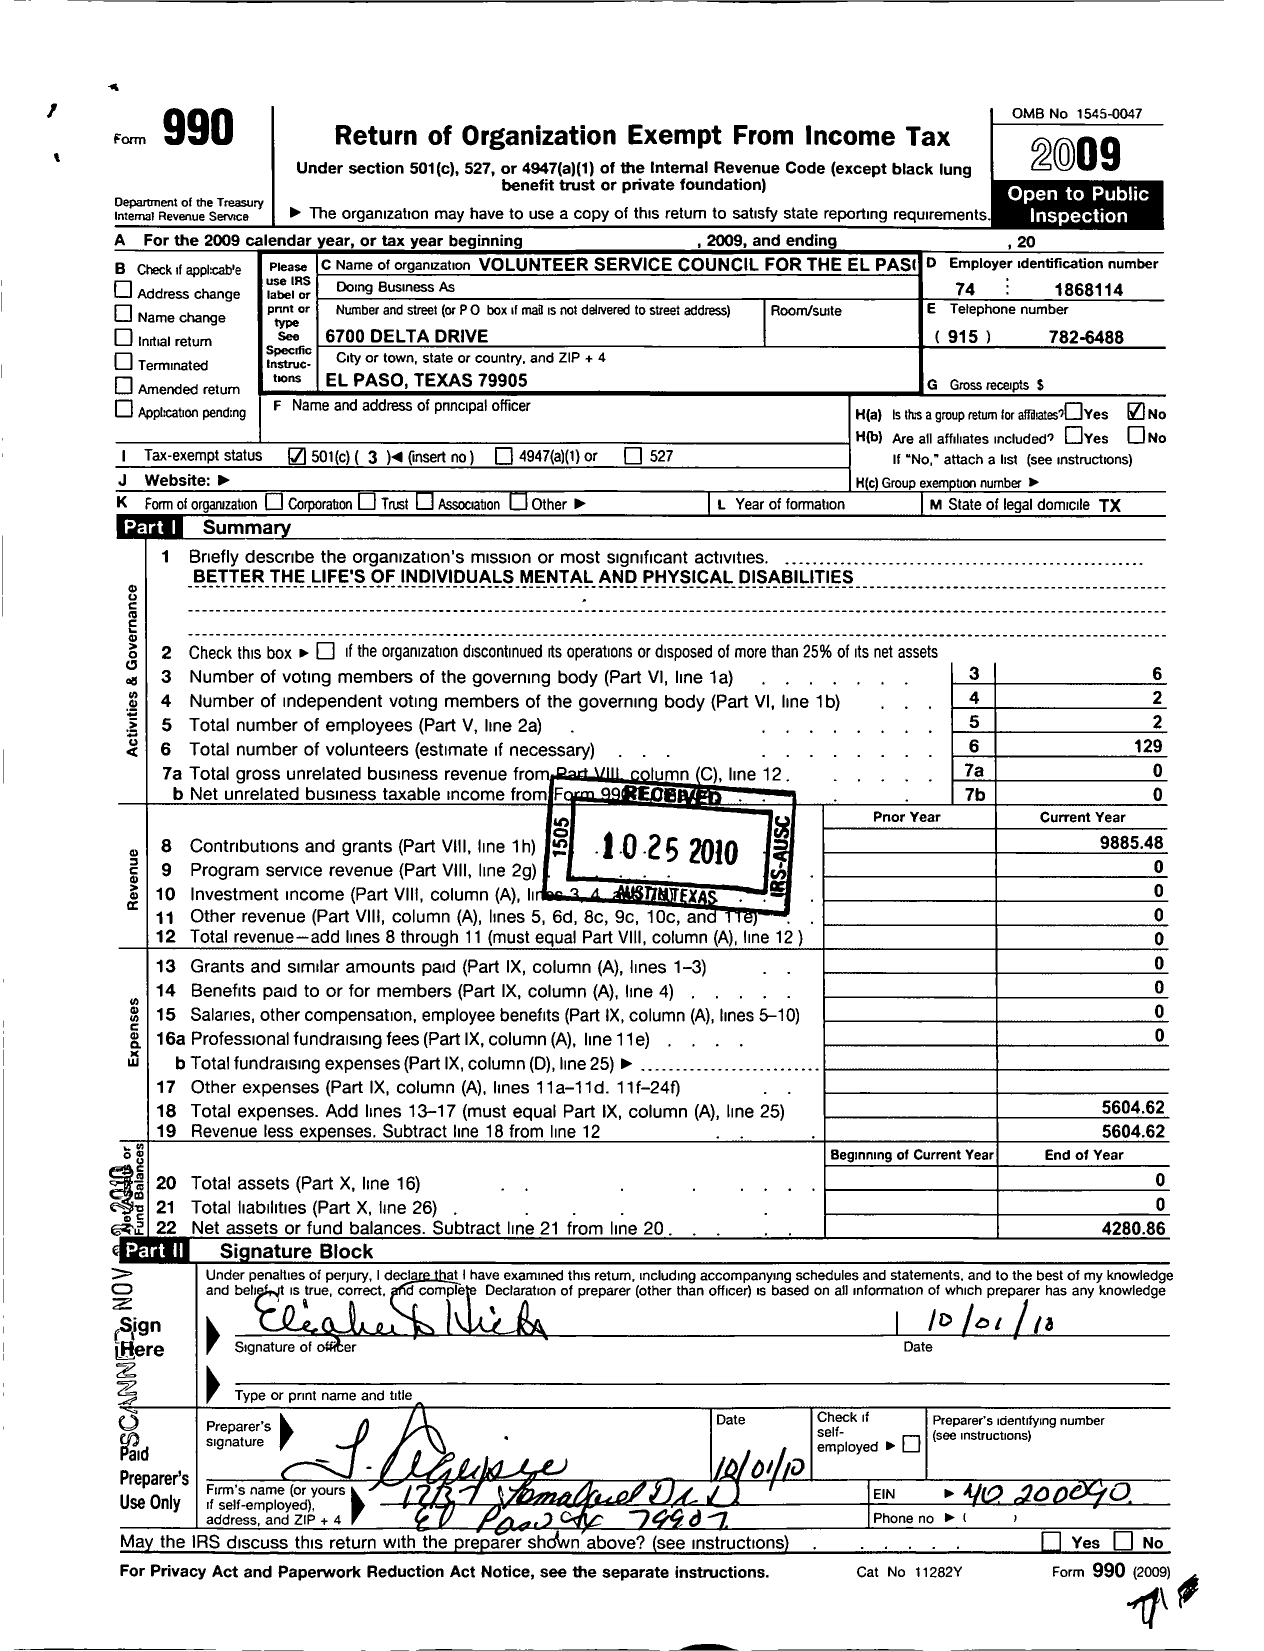 Image of first page of 2009 Form 990 for Volunteer Services Council of the El Paso State Center